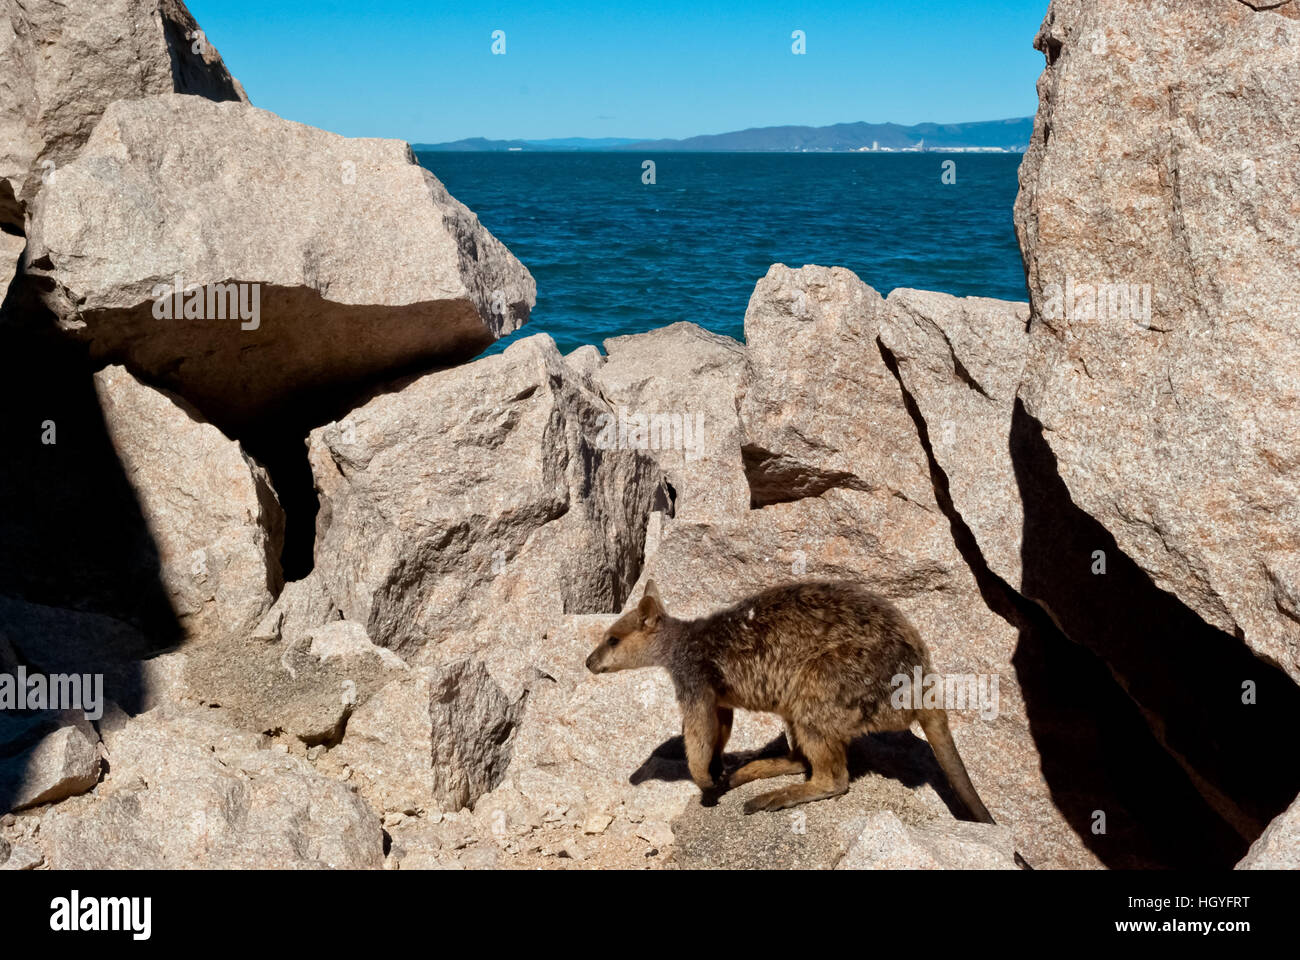 Rock wallaby, Magnetic Island, Australie Banque D'Images